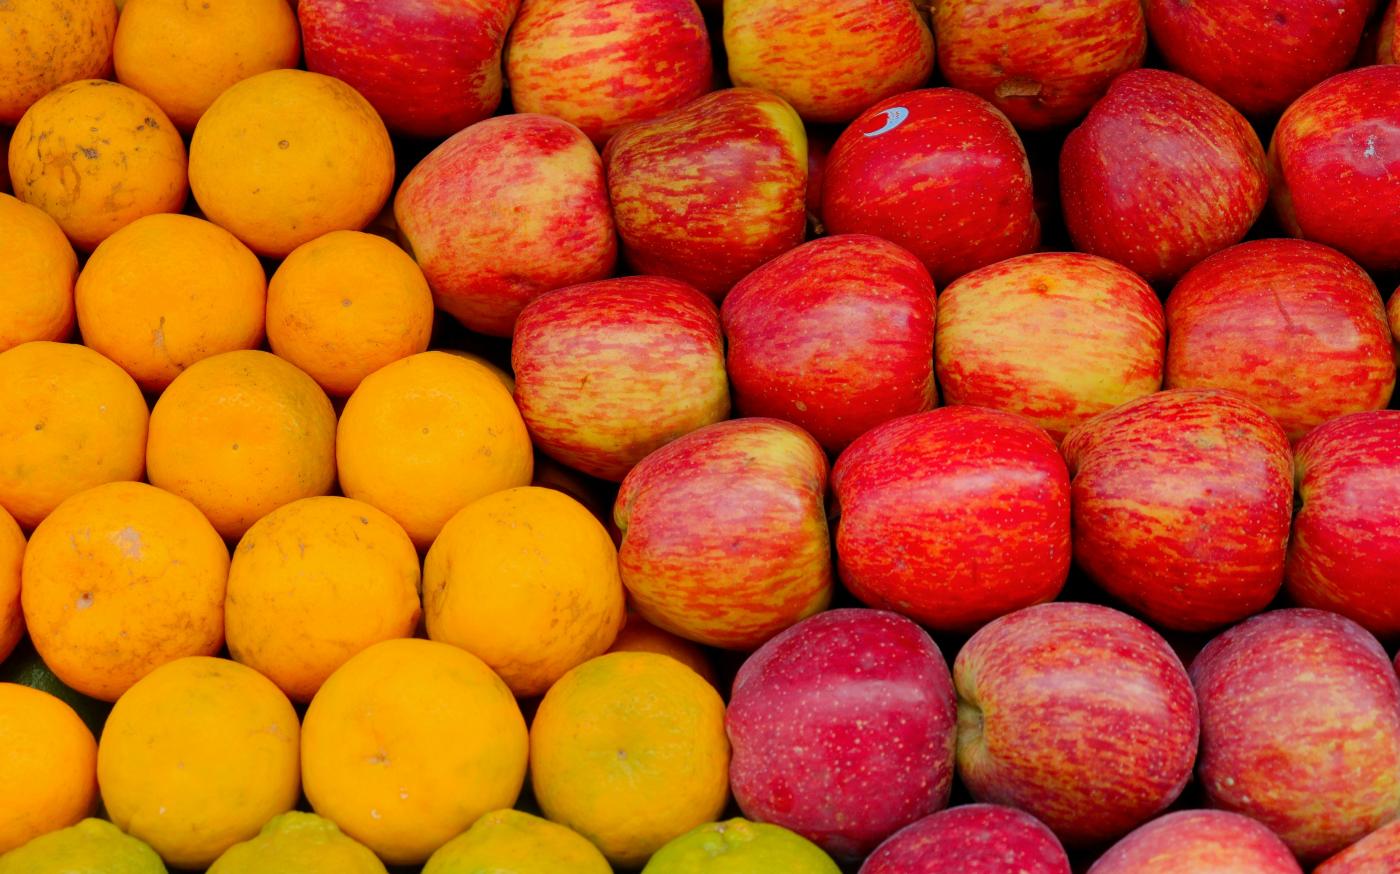 a pile of apples and oranges sitting next to each other by Gowtham AGM courtesy of Unsplash.